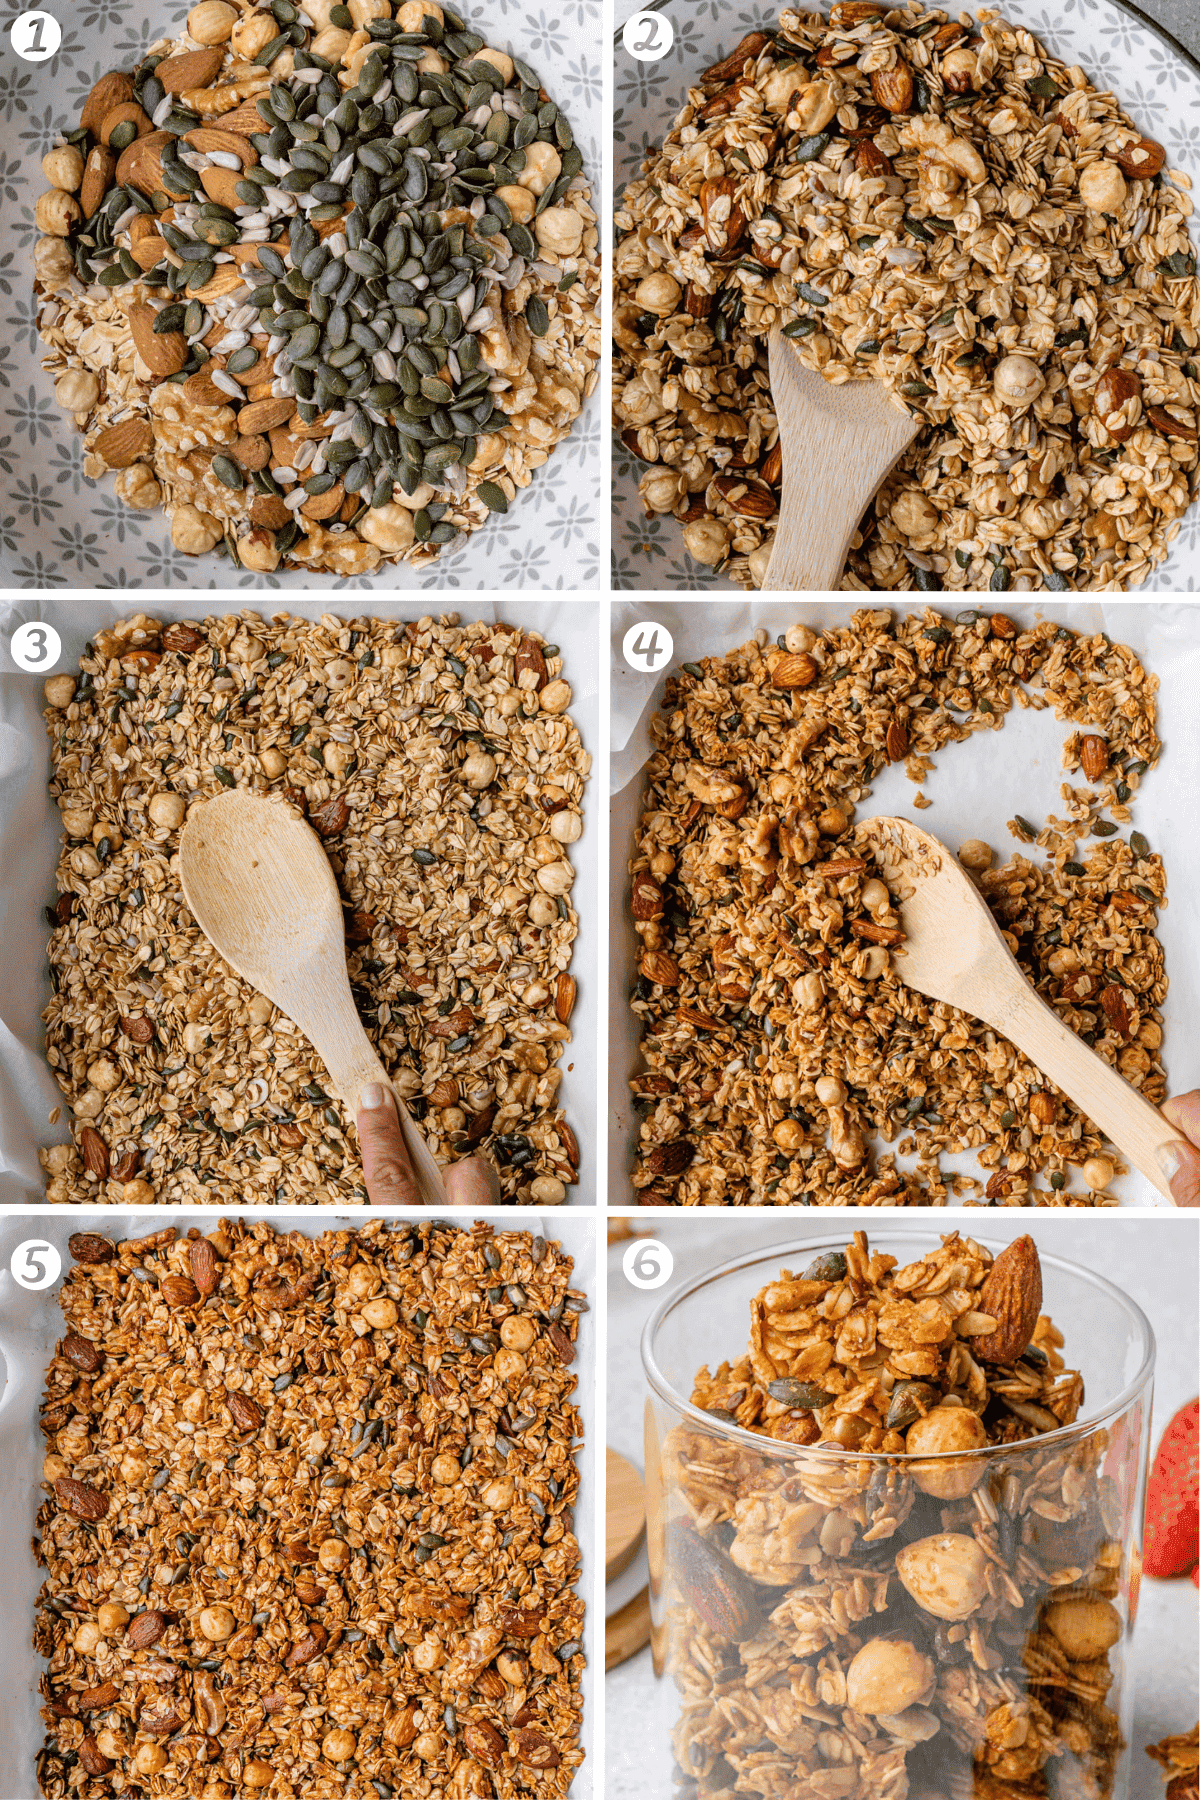 Steps on how to make healthy homemade granola